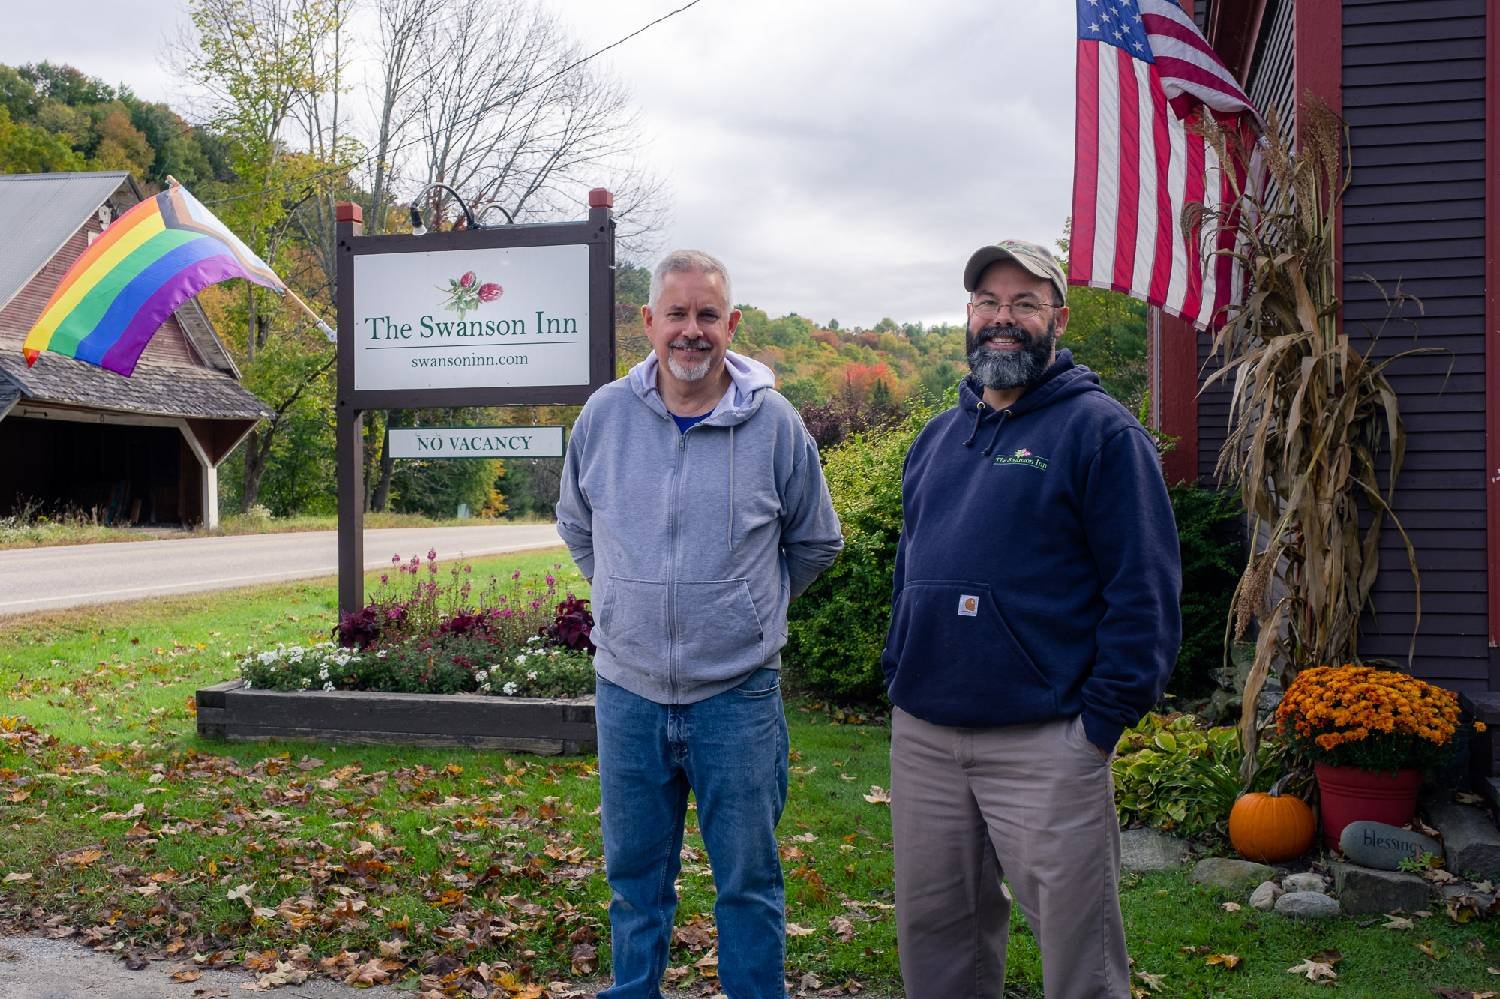 Owners Tim and Rick with the Swanson Inn sign in Waitsfield Vermont